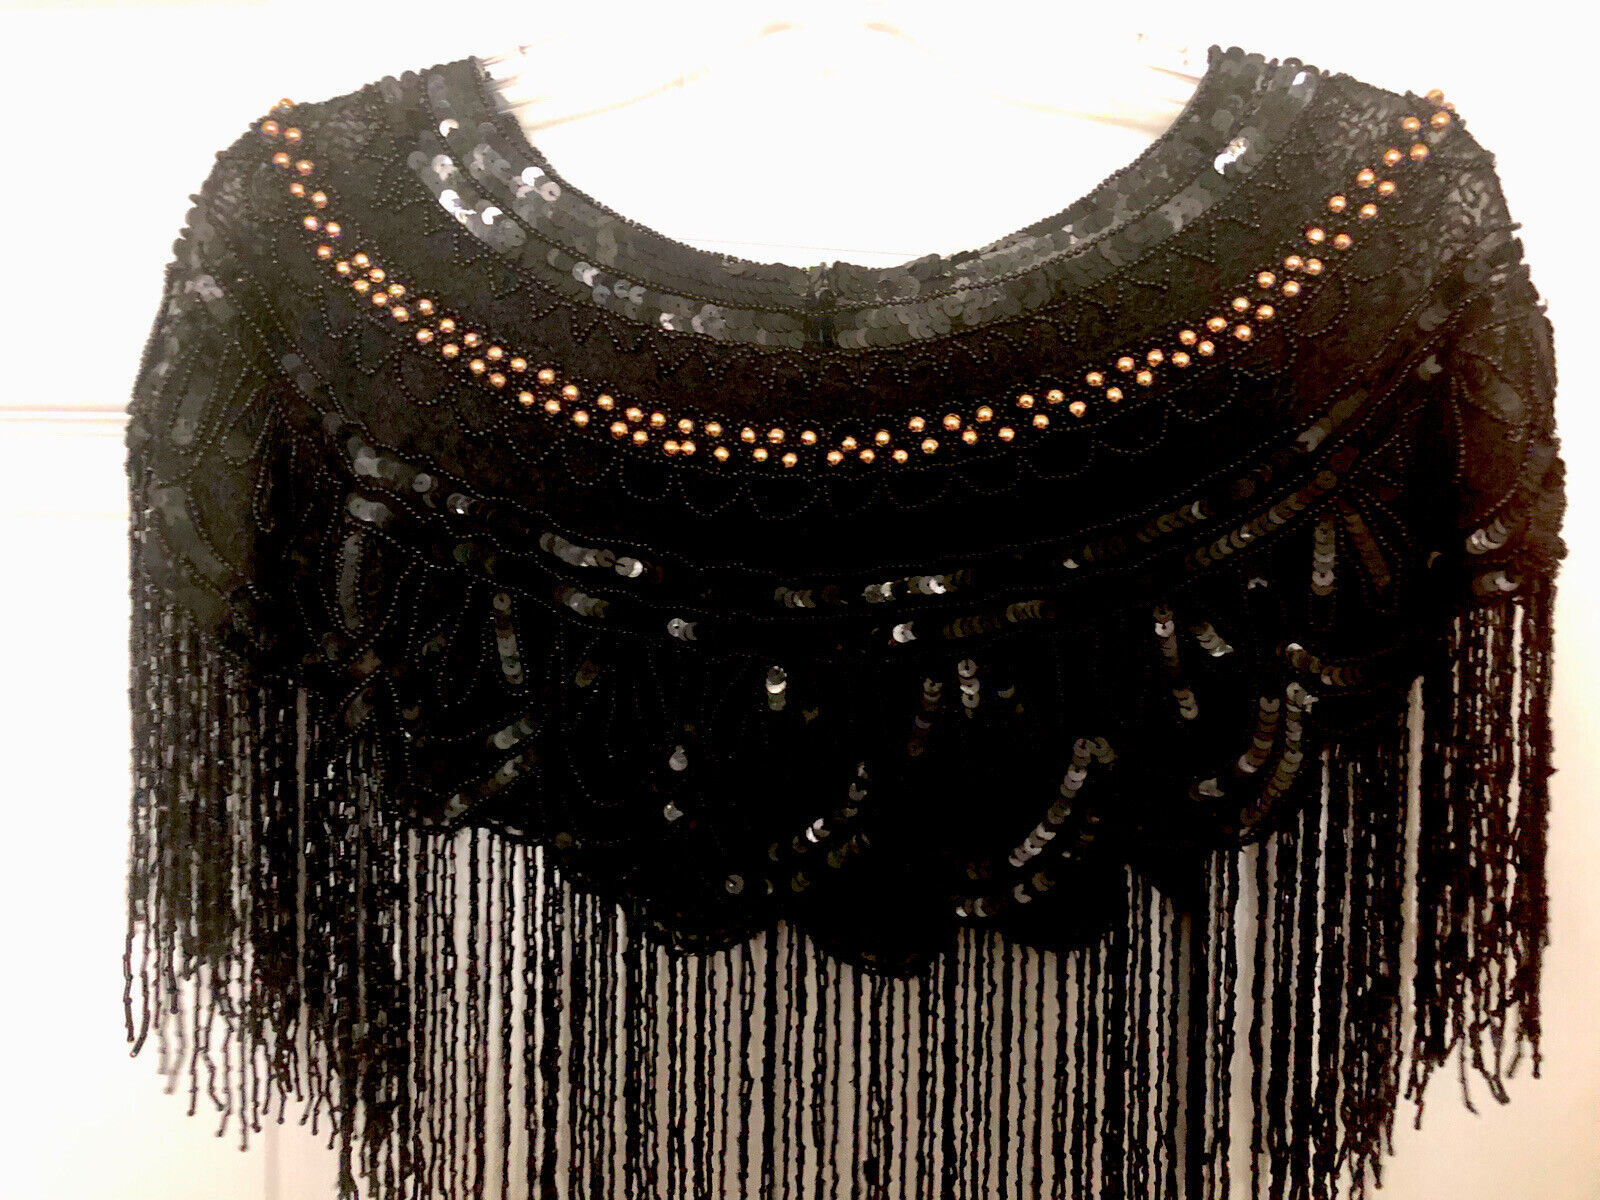 Vintage Style Beaded Cape With Tassels And Gold Beads. One Size